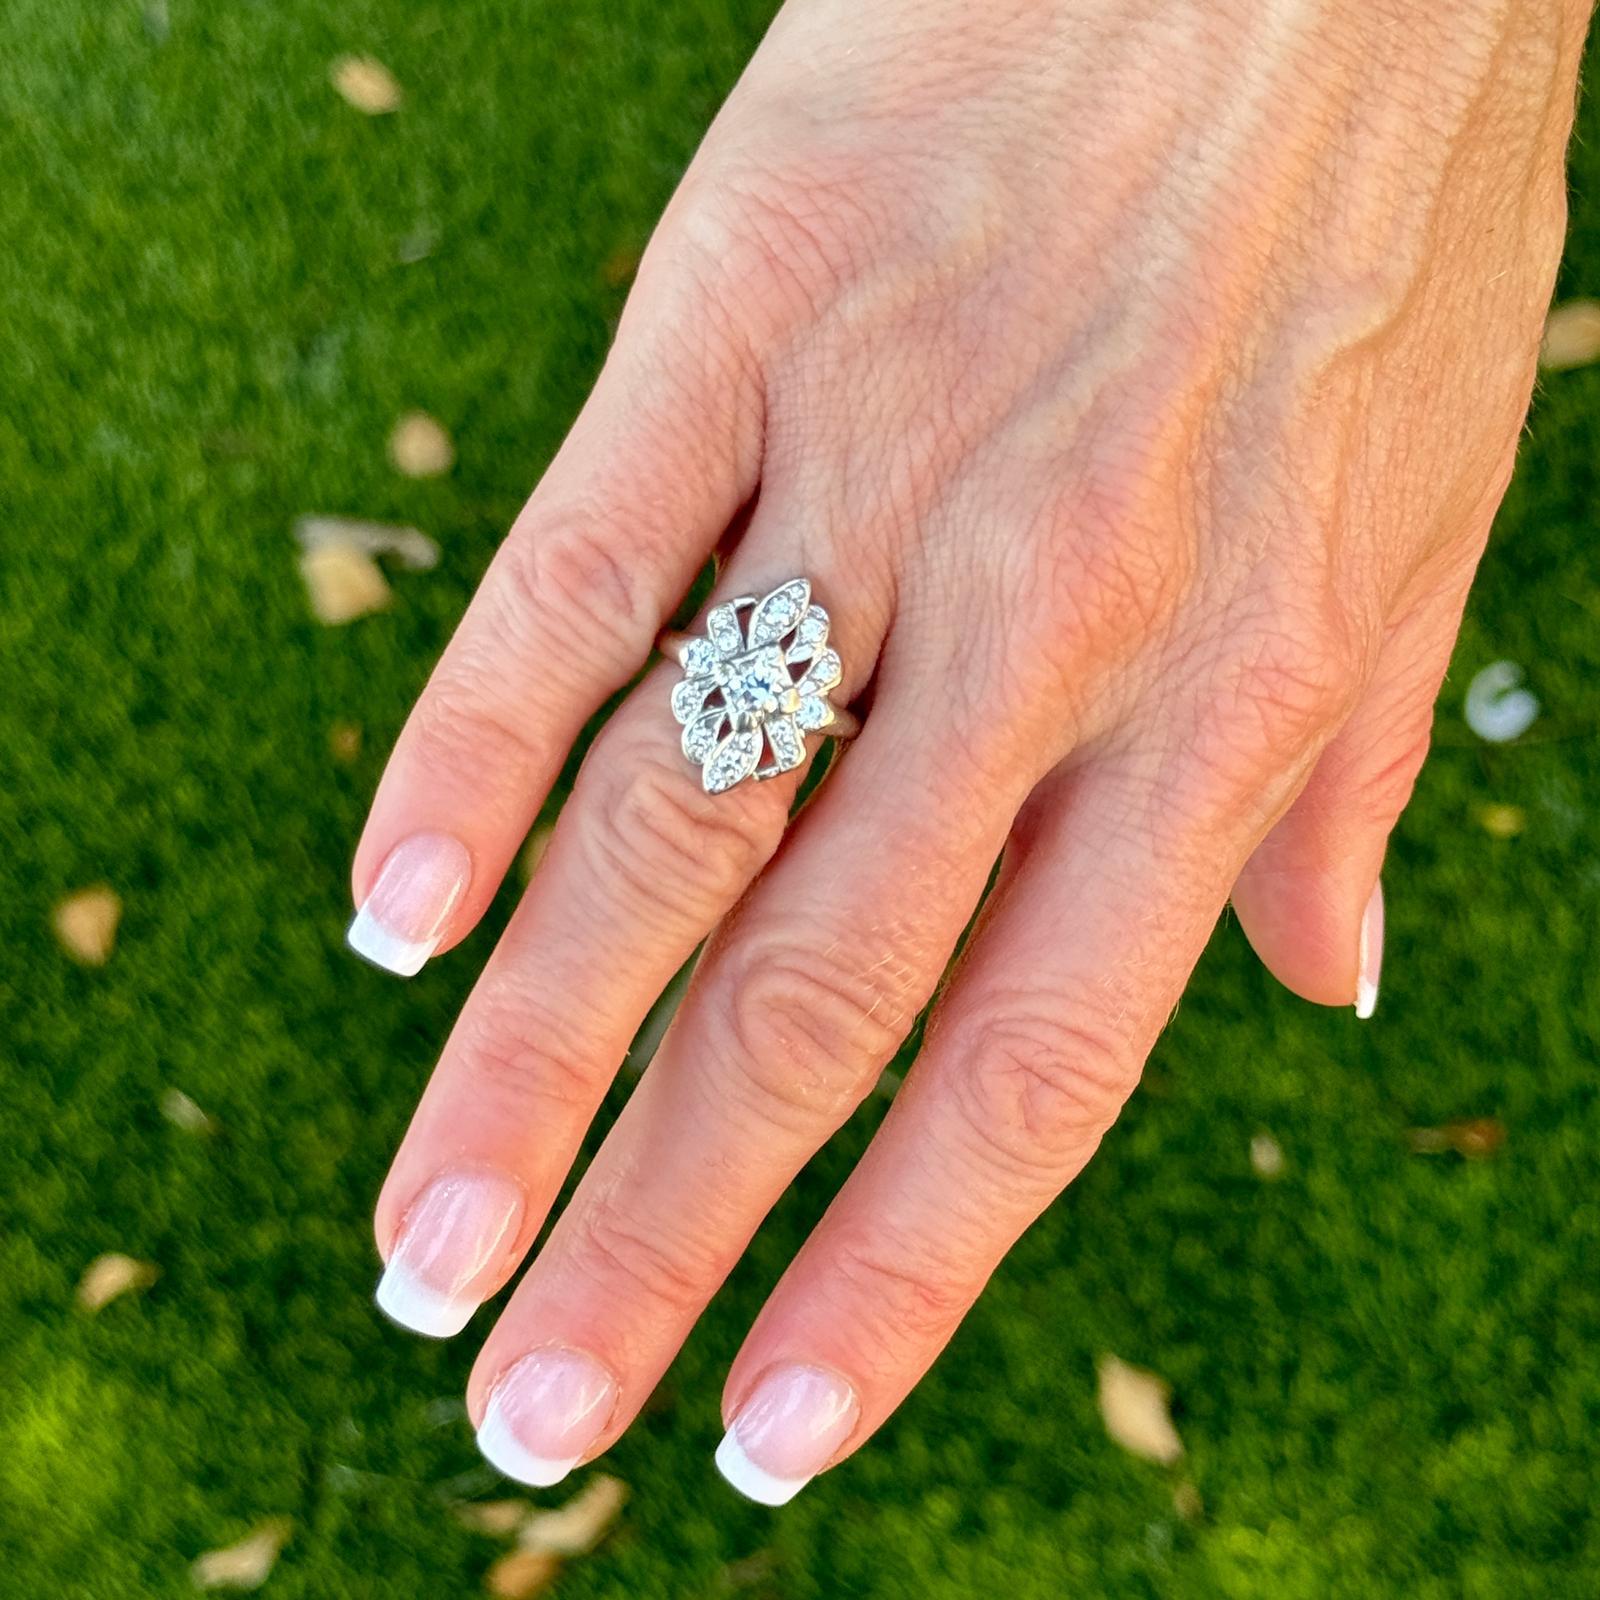 This stunning 1950's vintage cocktail ring handcrafted in 14 karat white gold is an example of timeless elegance and glamour. The ring is adorned with an approximate .38 carat Old European cut center diamond and 16 accent diamonds weighing another